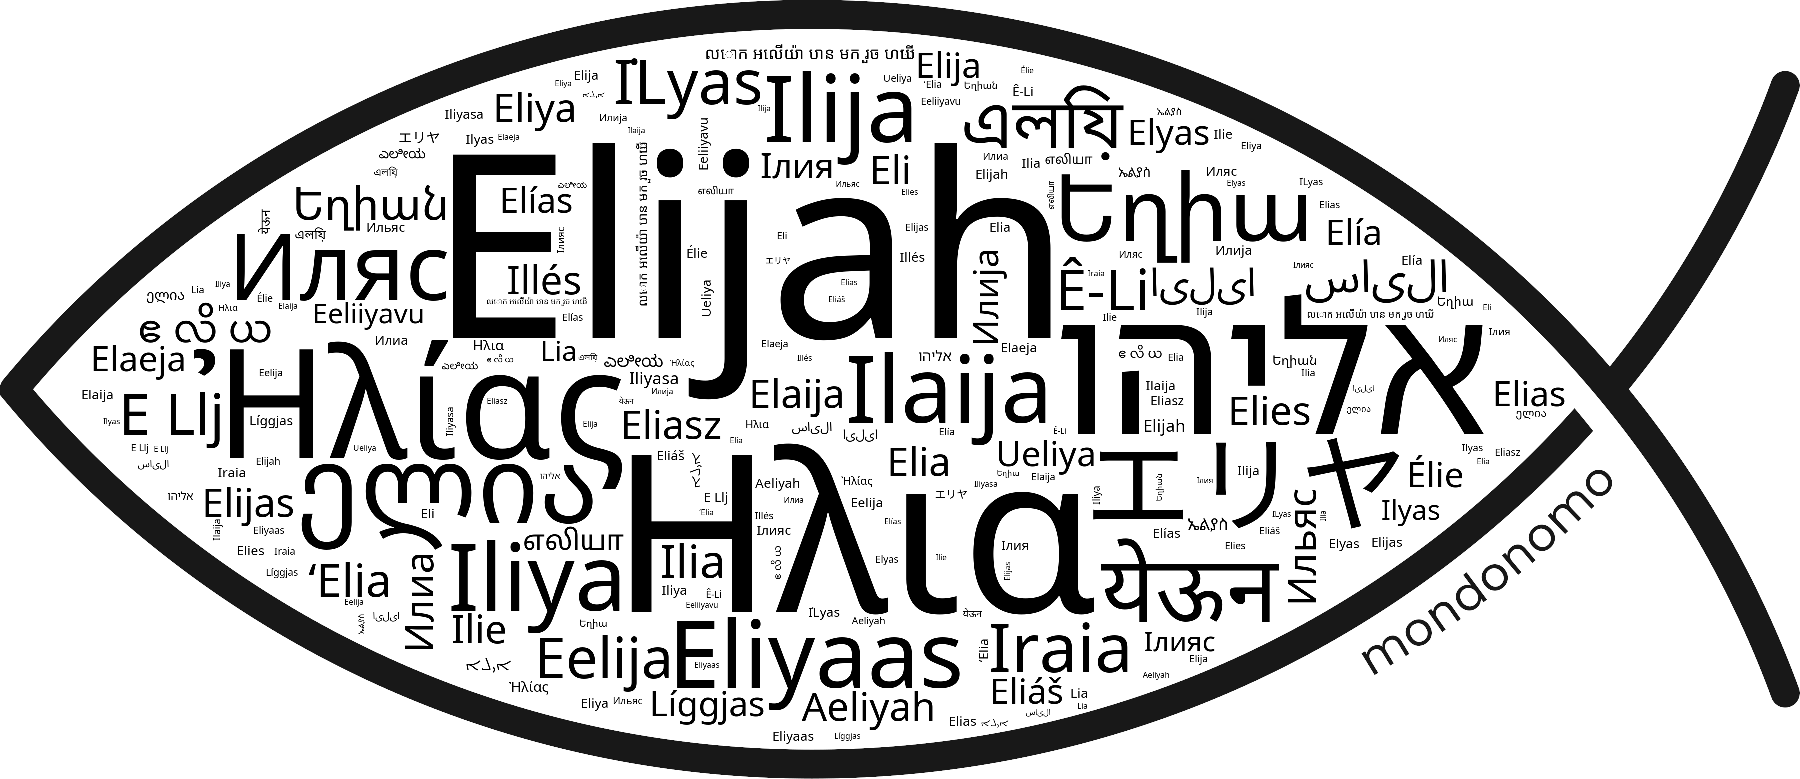 Name Elijah in the world's Bibles